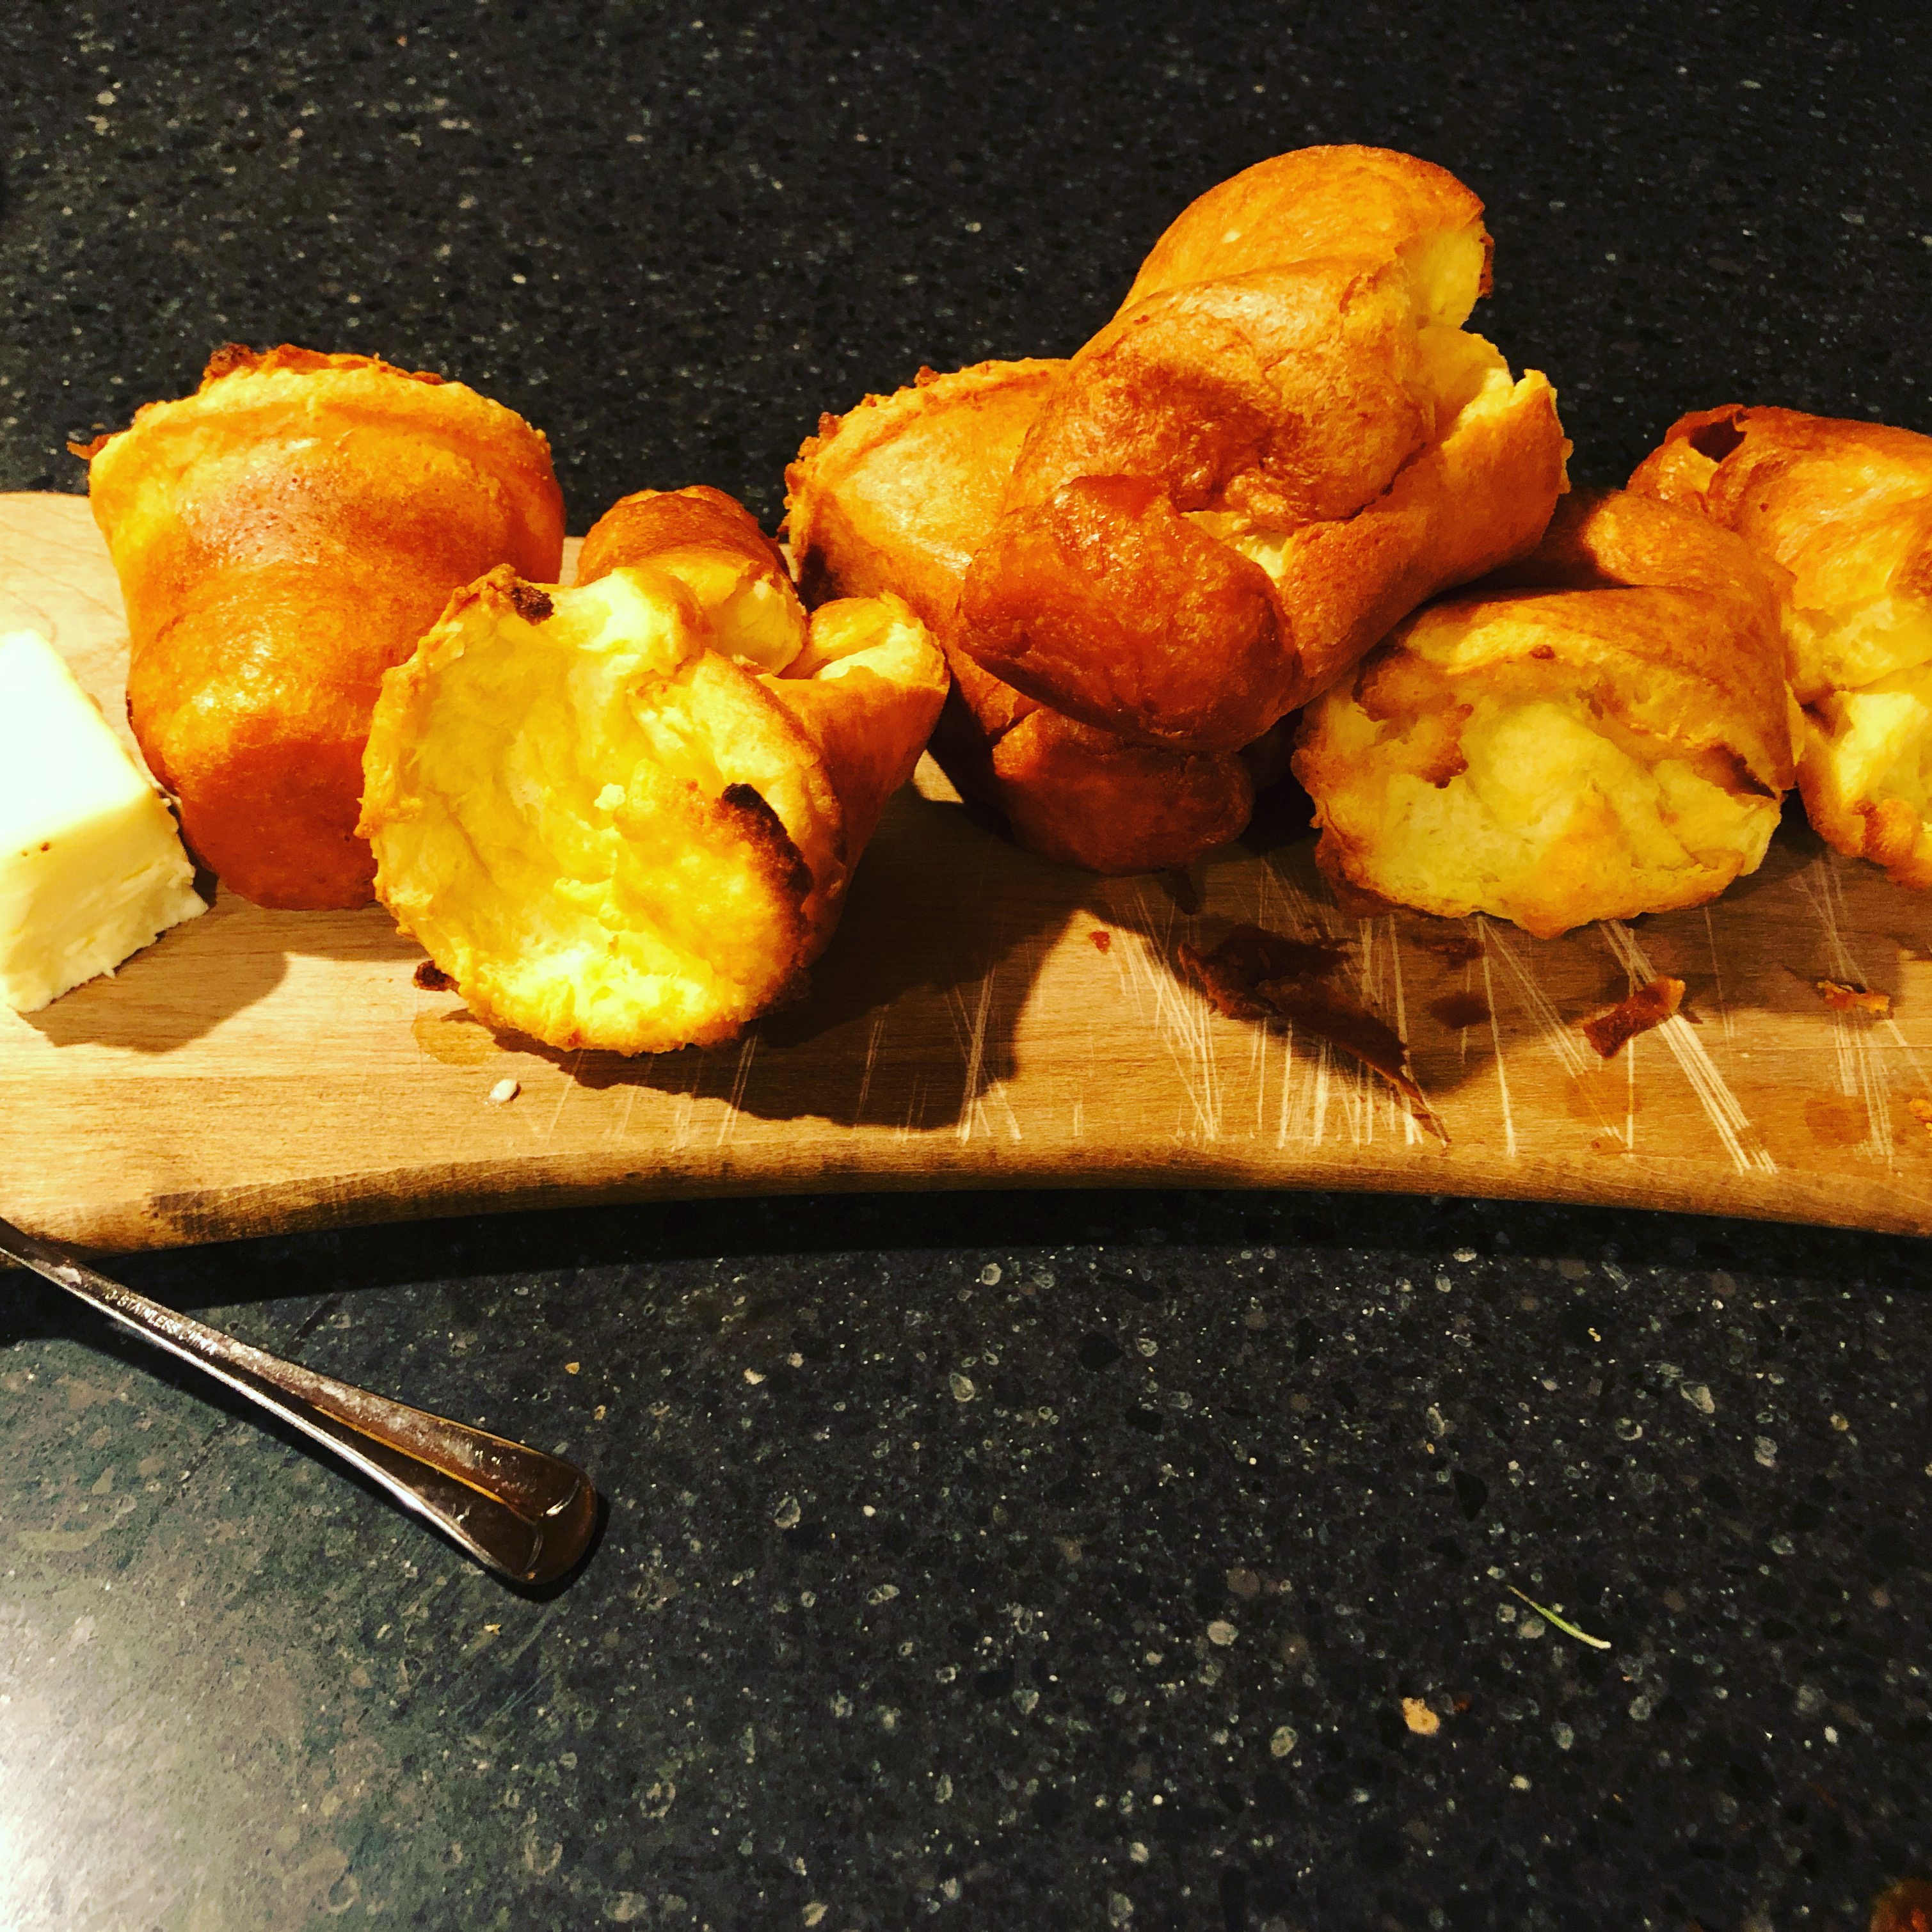 Traditional Popovers 